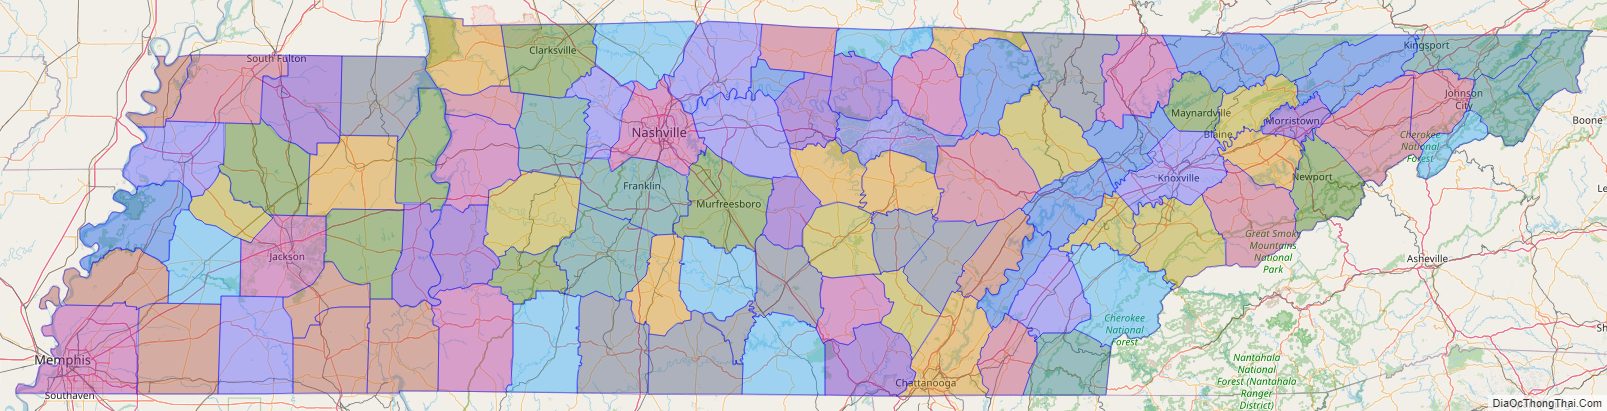 Printable - Large Scale Political Map of Tennessee